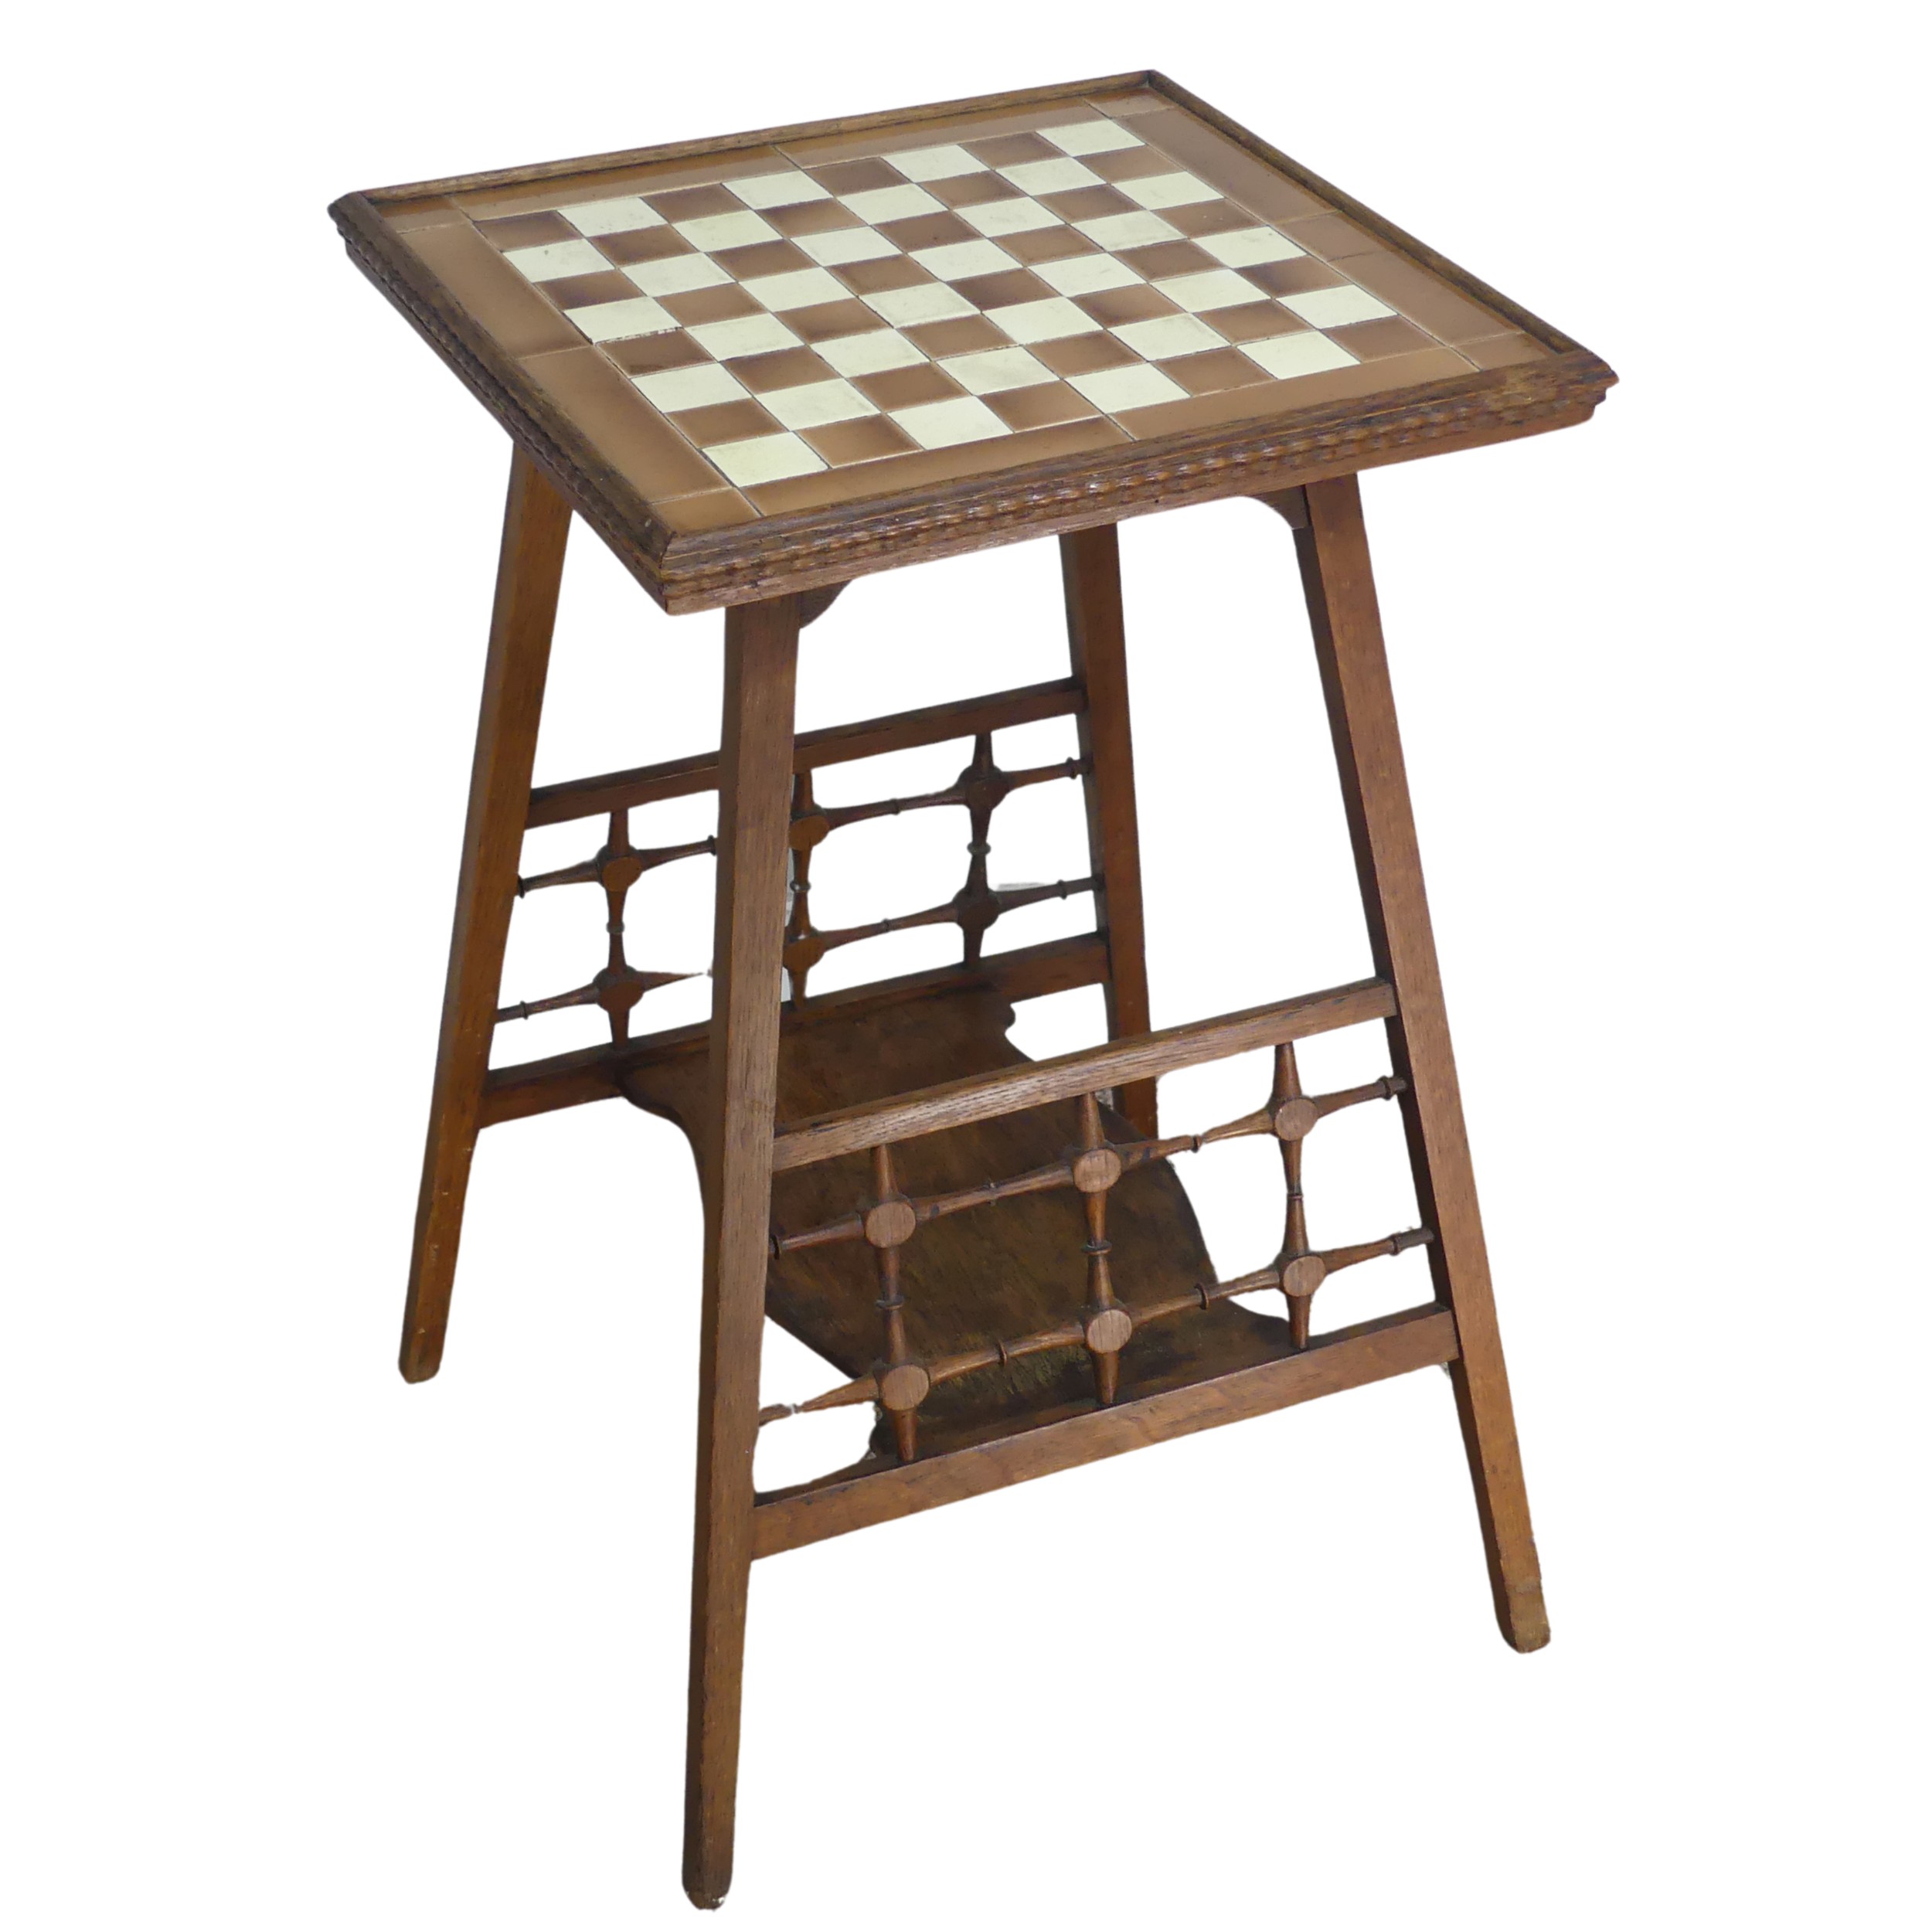 An unusual Arts and Crafts/Aesthetic Movement oak tile top Table, probably by Shapland and Petter o